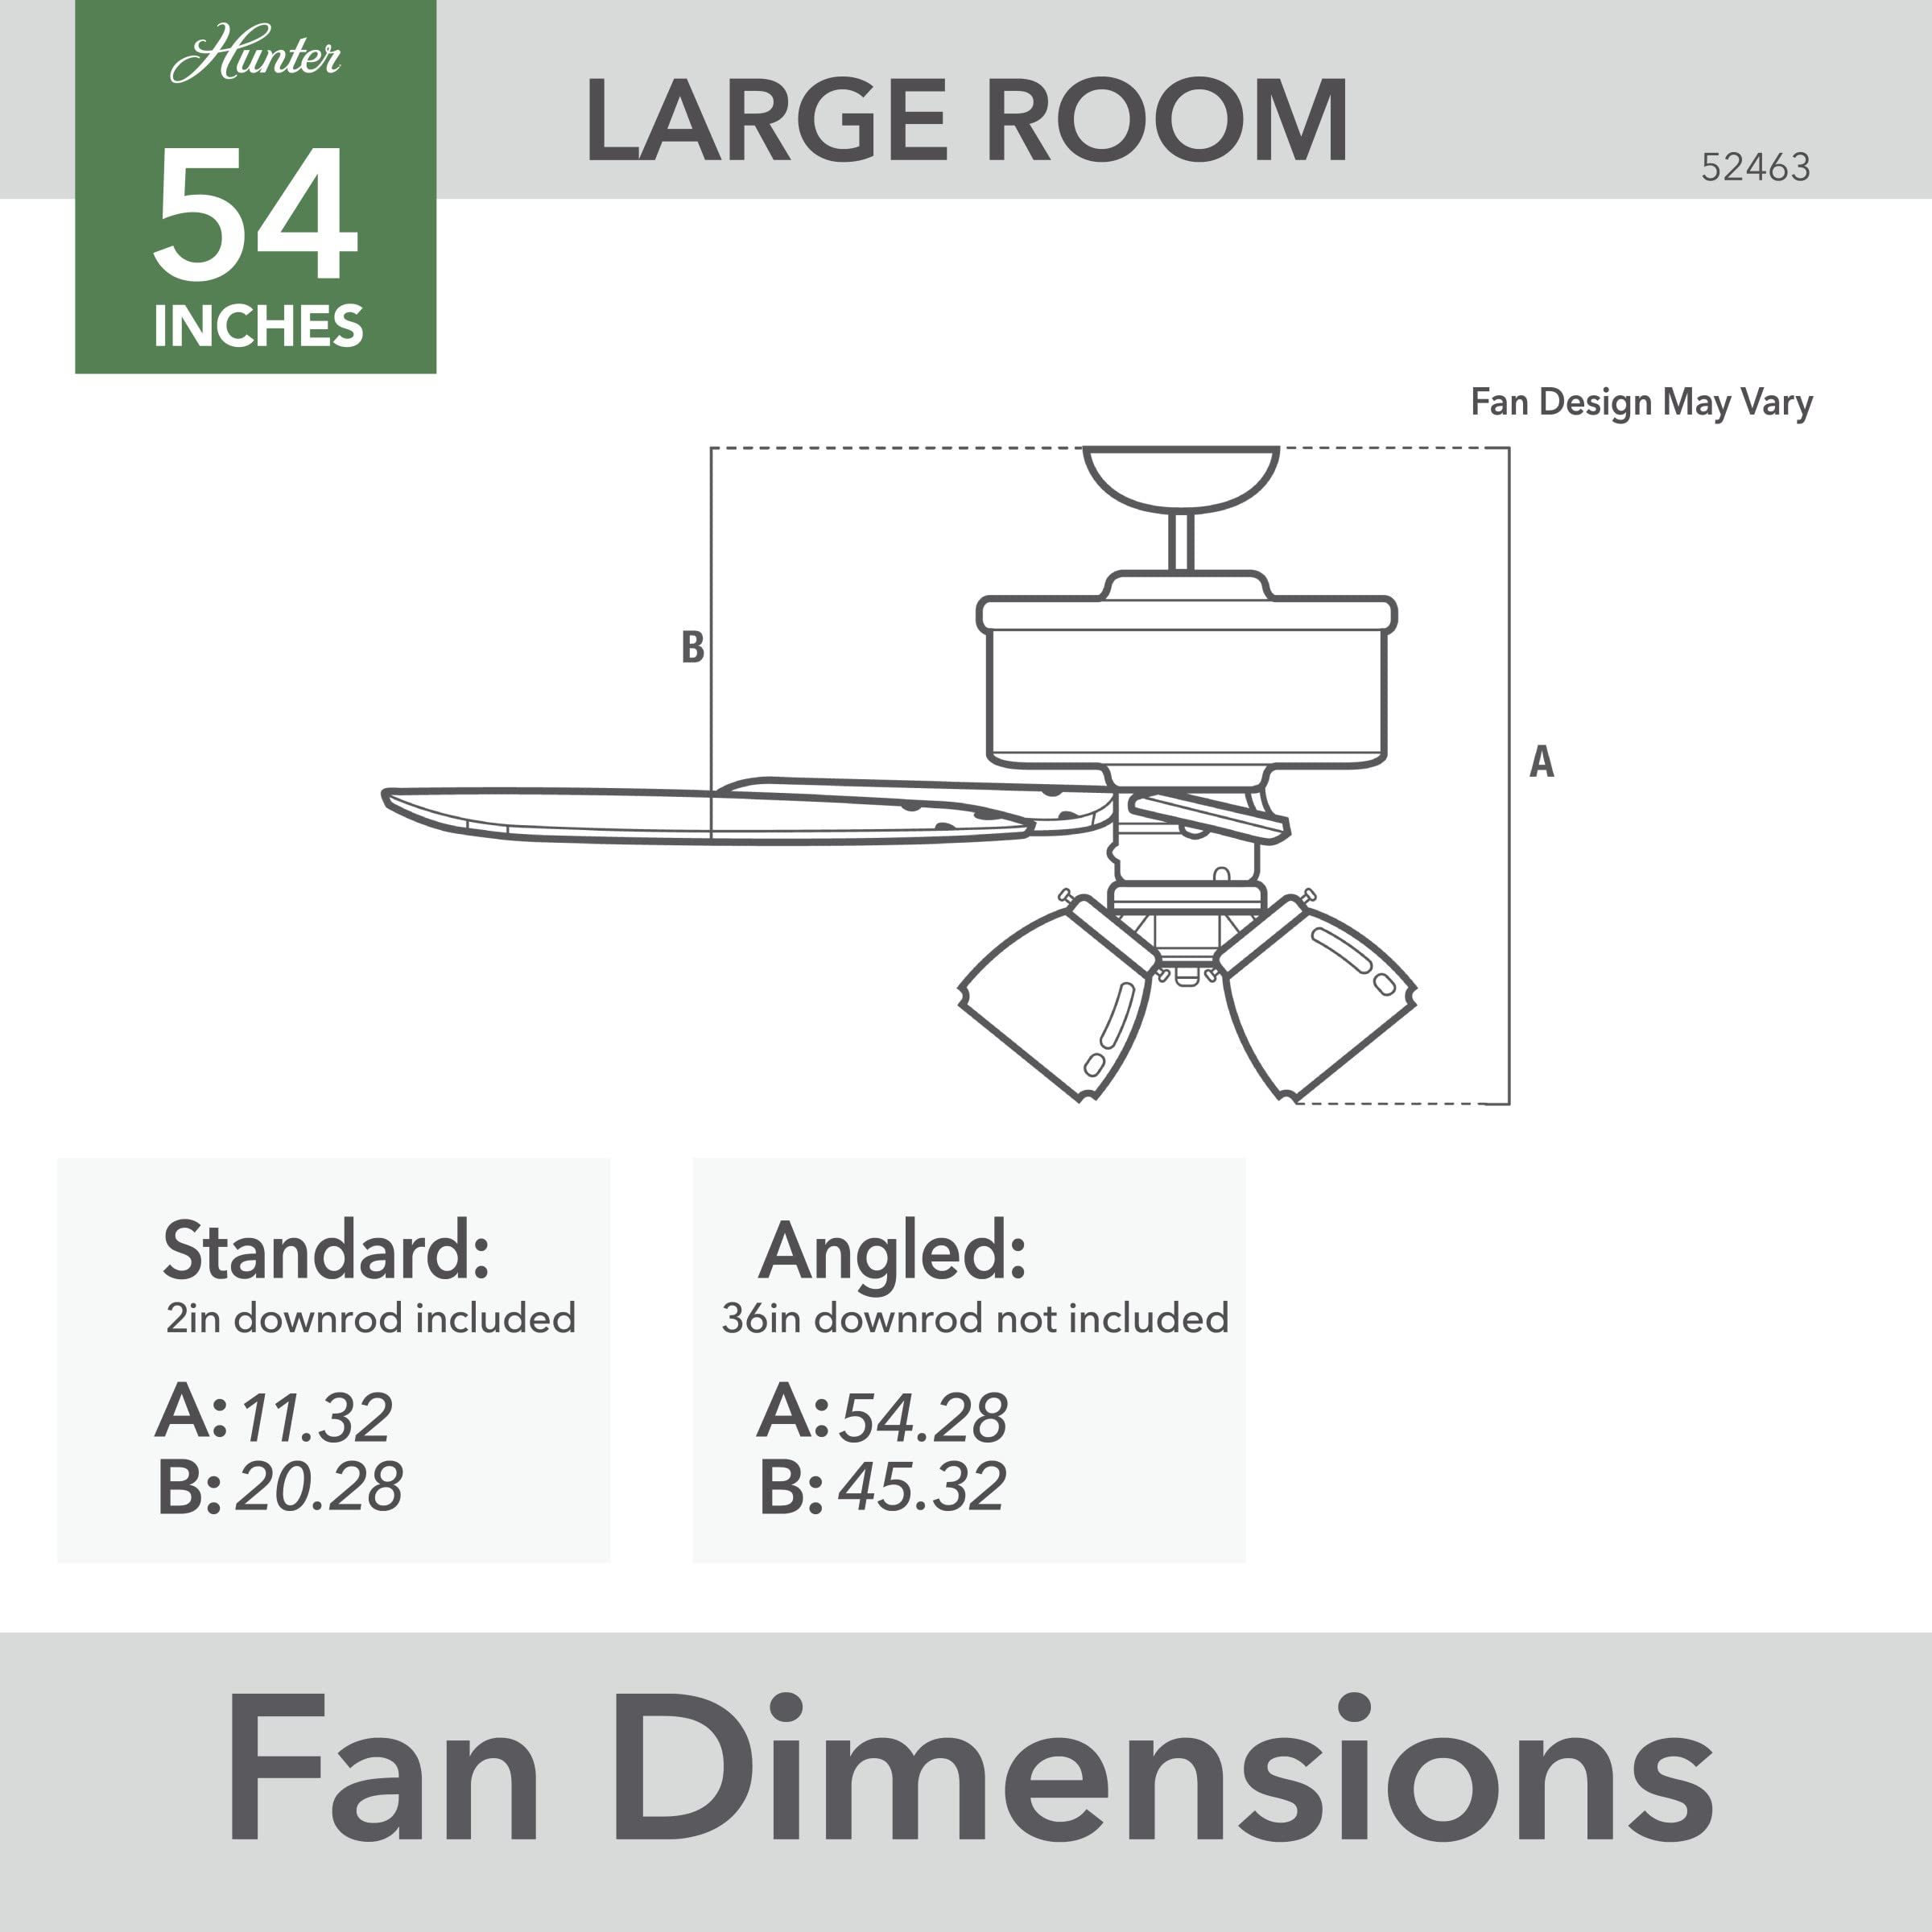 Hunter Fan Company, 59545, 54 inch Promenade Gloss Black Ceiling Fan with LED Light Kit and Handheld Remote